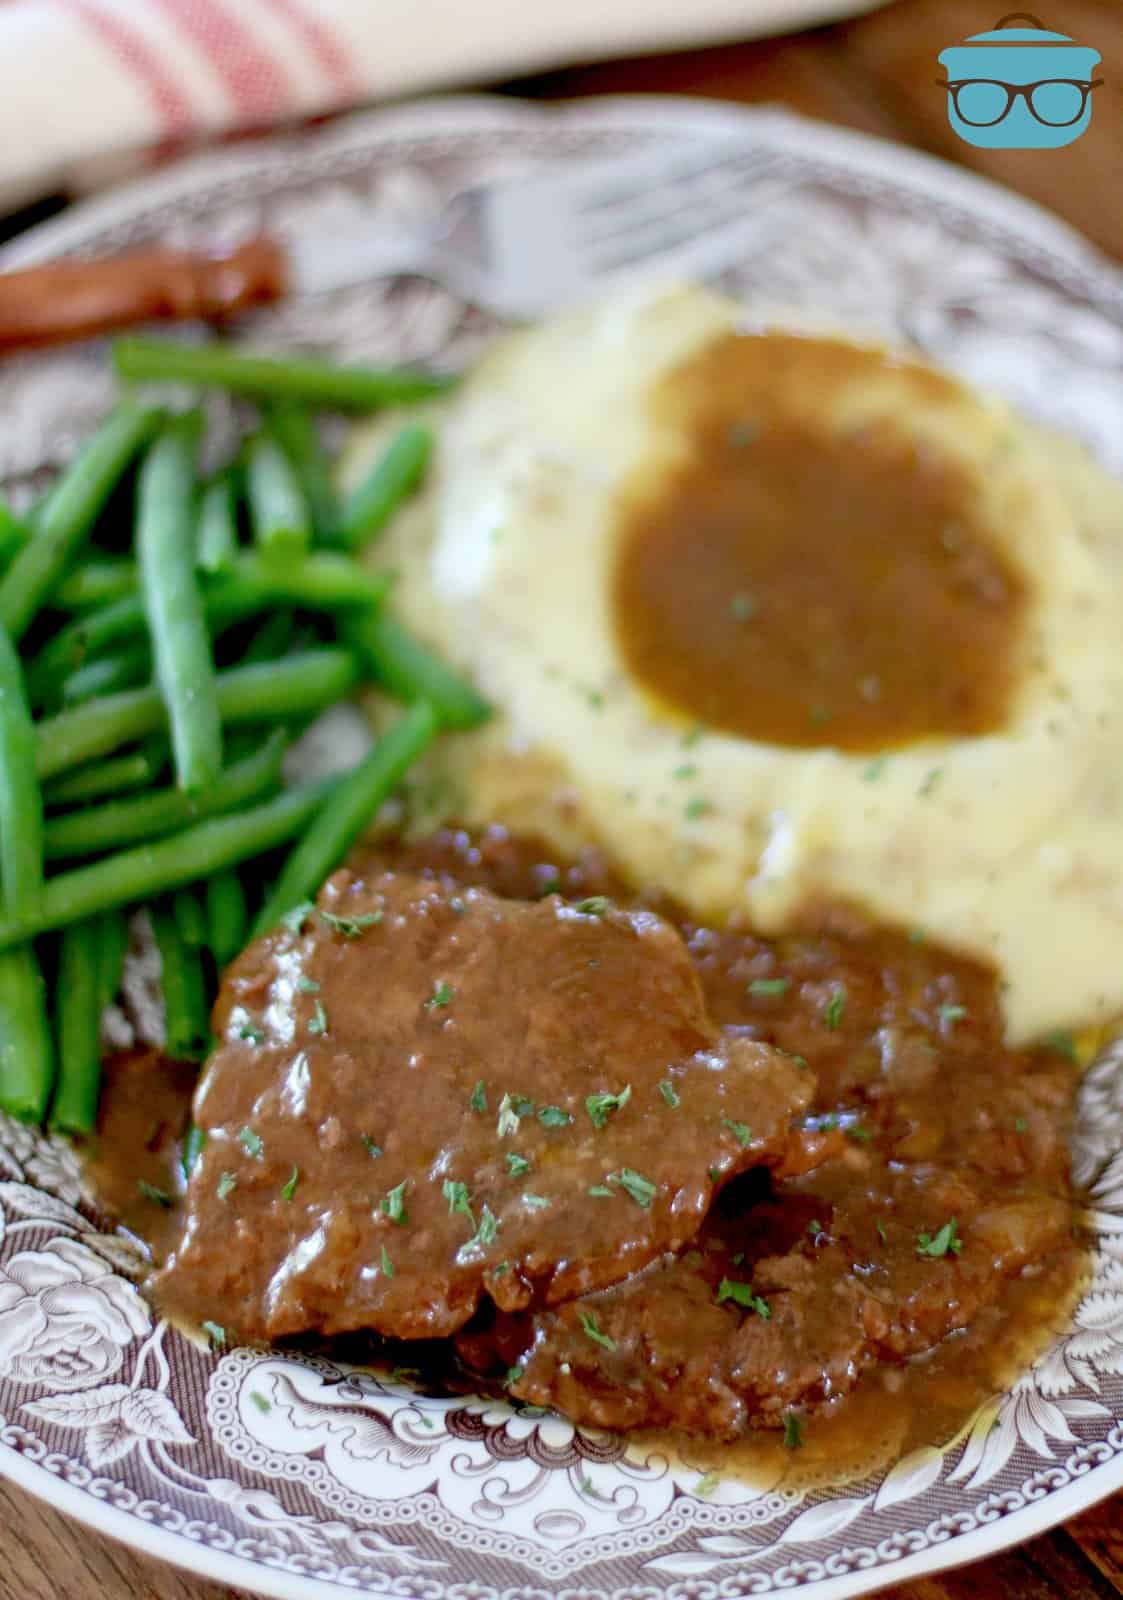 cube steak shown served on a plate with mashed potatoes and green beans.